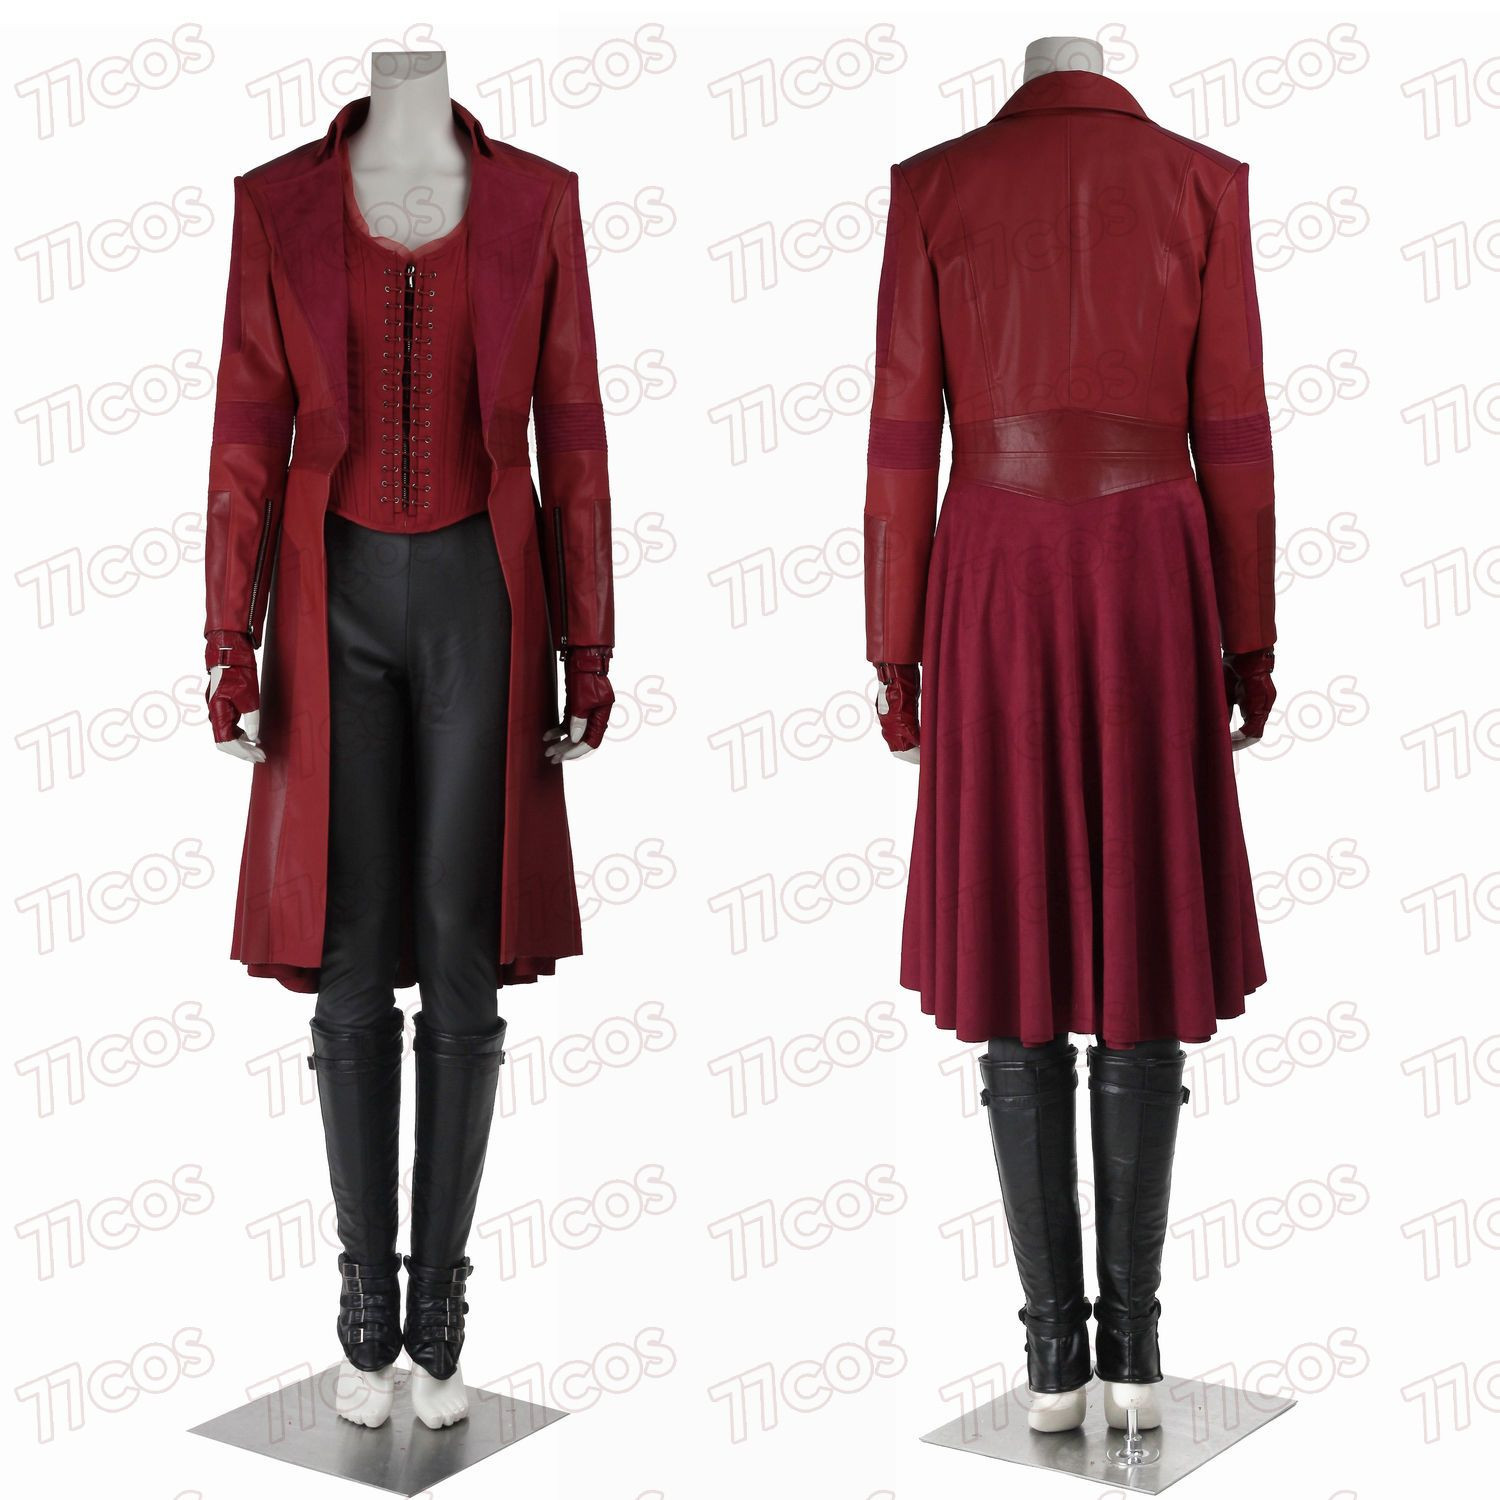 Scarlet Witch Costume DIY
 Details about Captain America Civil War Scarlet Witch